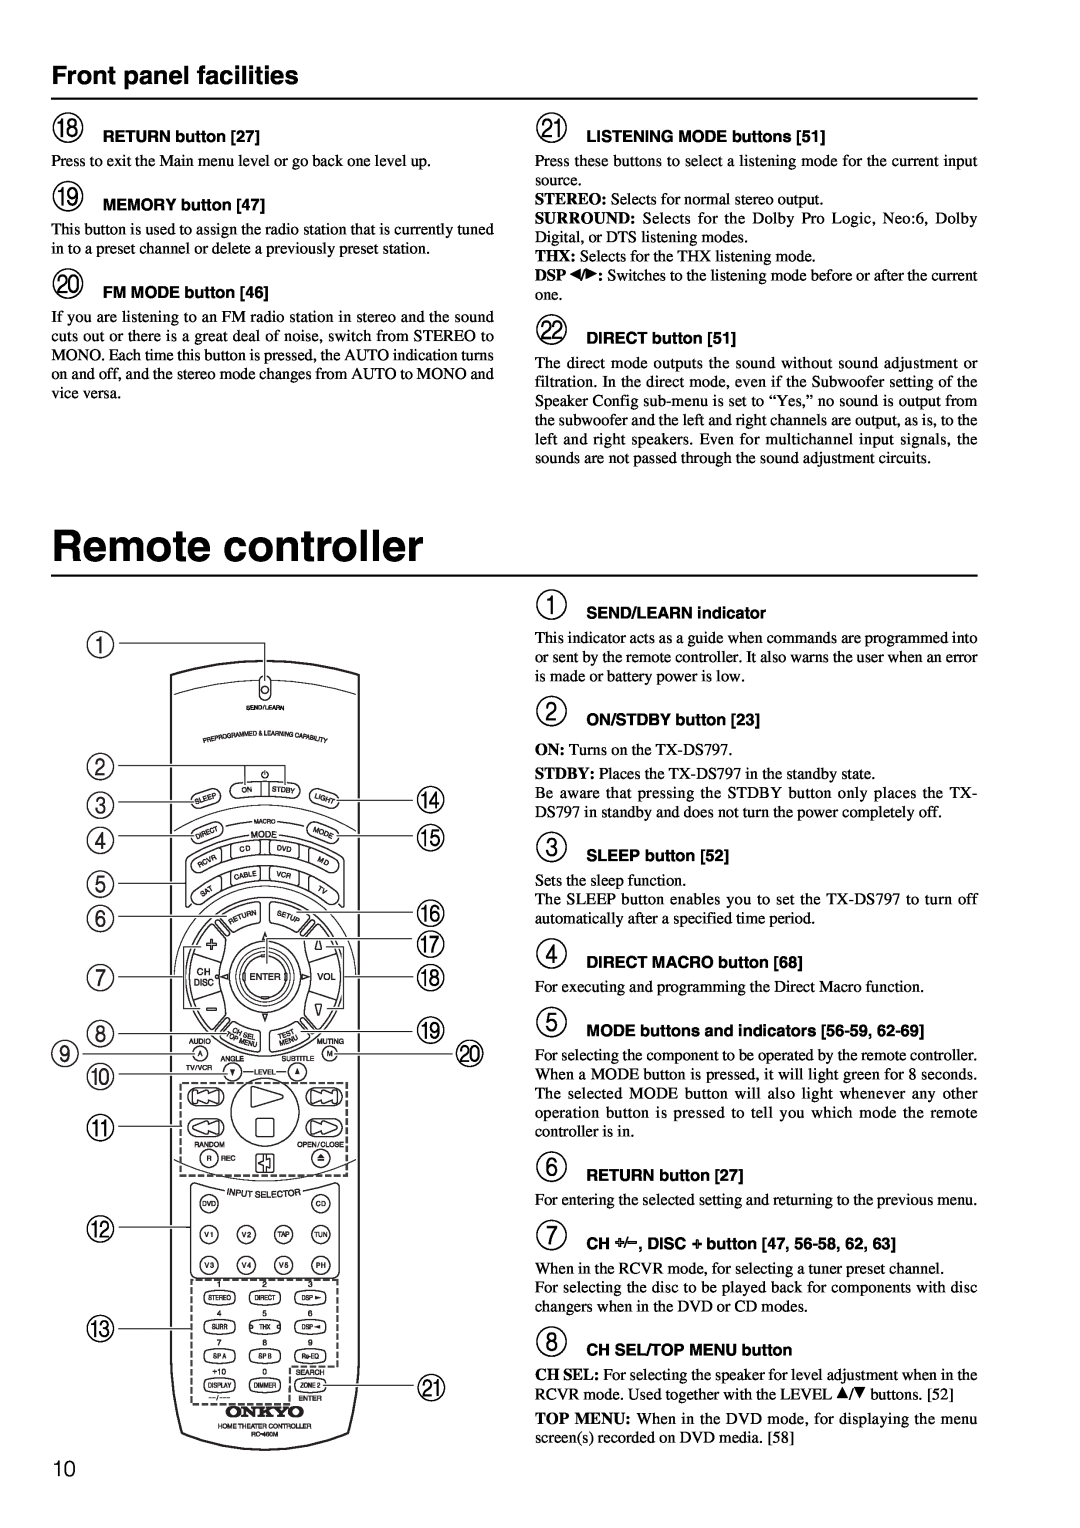 Onkyo TX-DS797 instruction manual Remote controller, Front panel facilities 